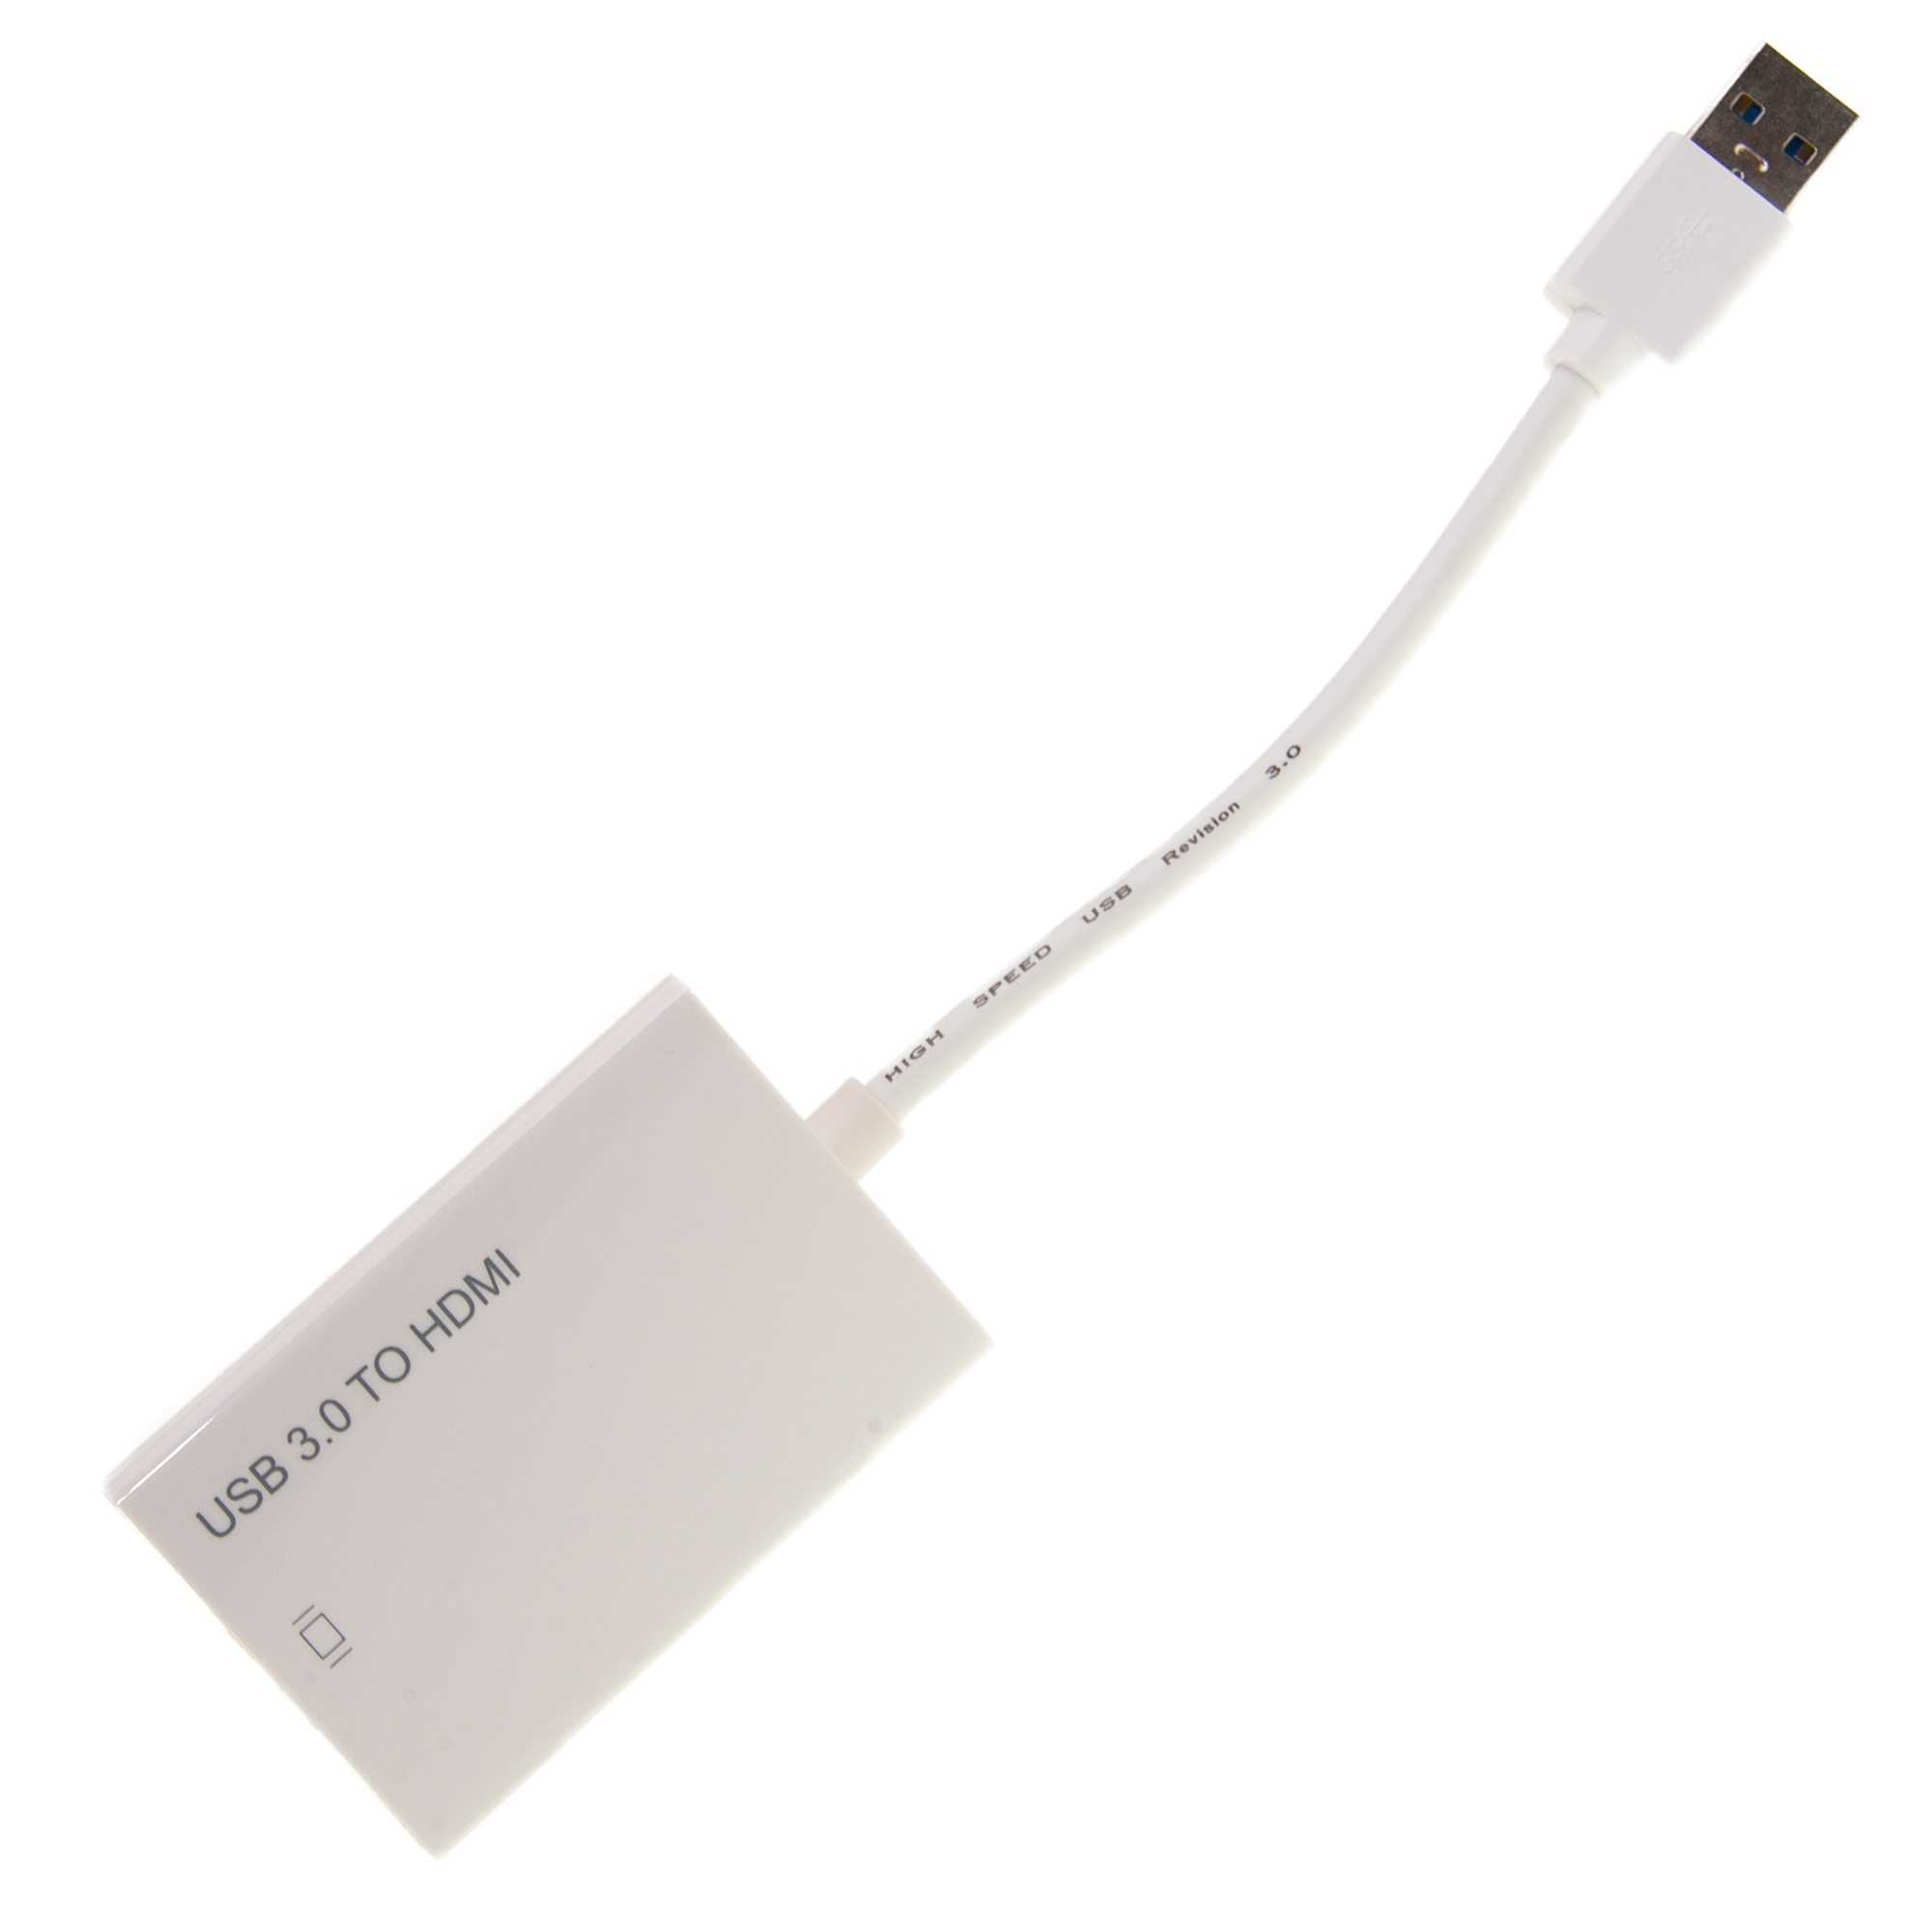 USB to HDMI Video Adapter, port, Windows and Apple/Mac